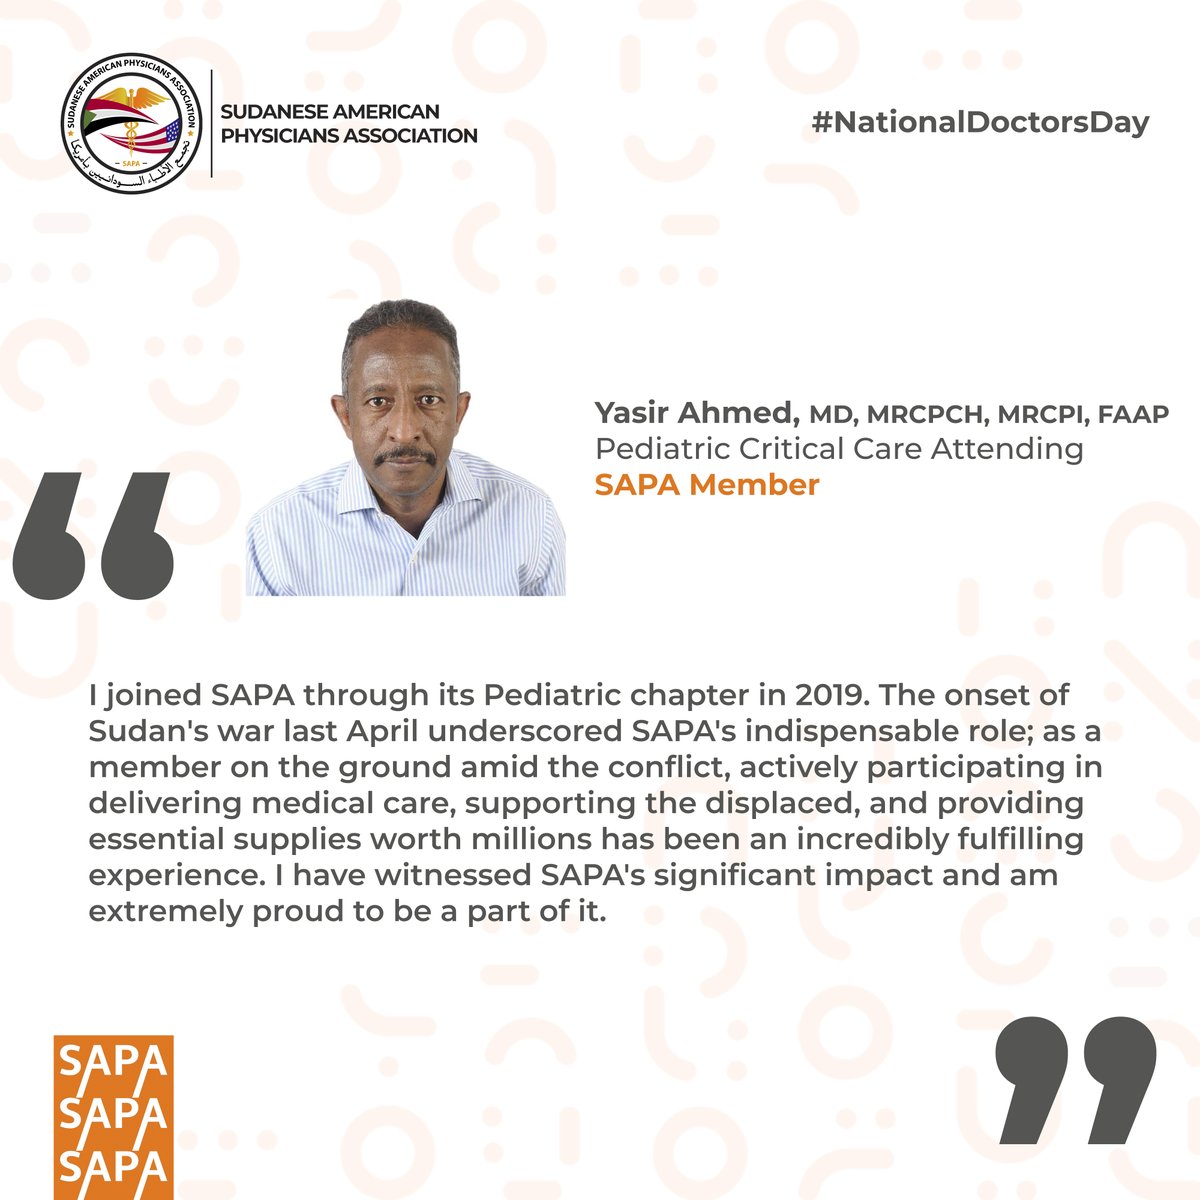 Happy National Doctors' Day from SAPA!
Today, we celebrate our dedicated members, especially highlighting three who've made significant impacts. Thank you to all our members for your commitment to healthcare excellence beyond your everyday responsibilities! #sapahopeforsudan